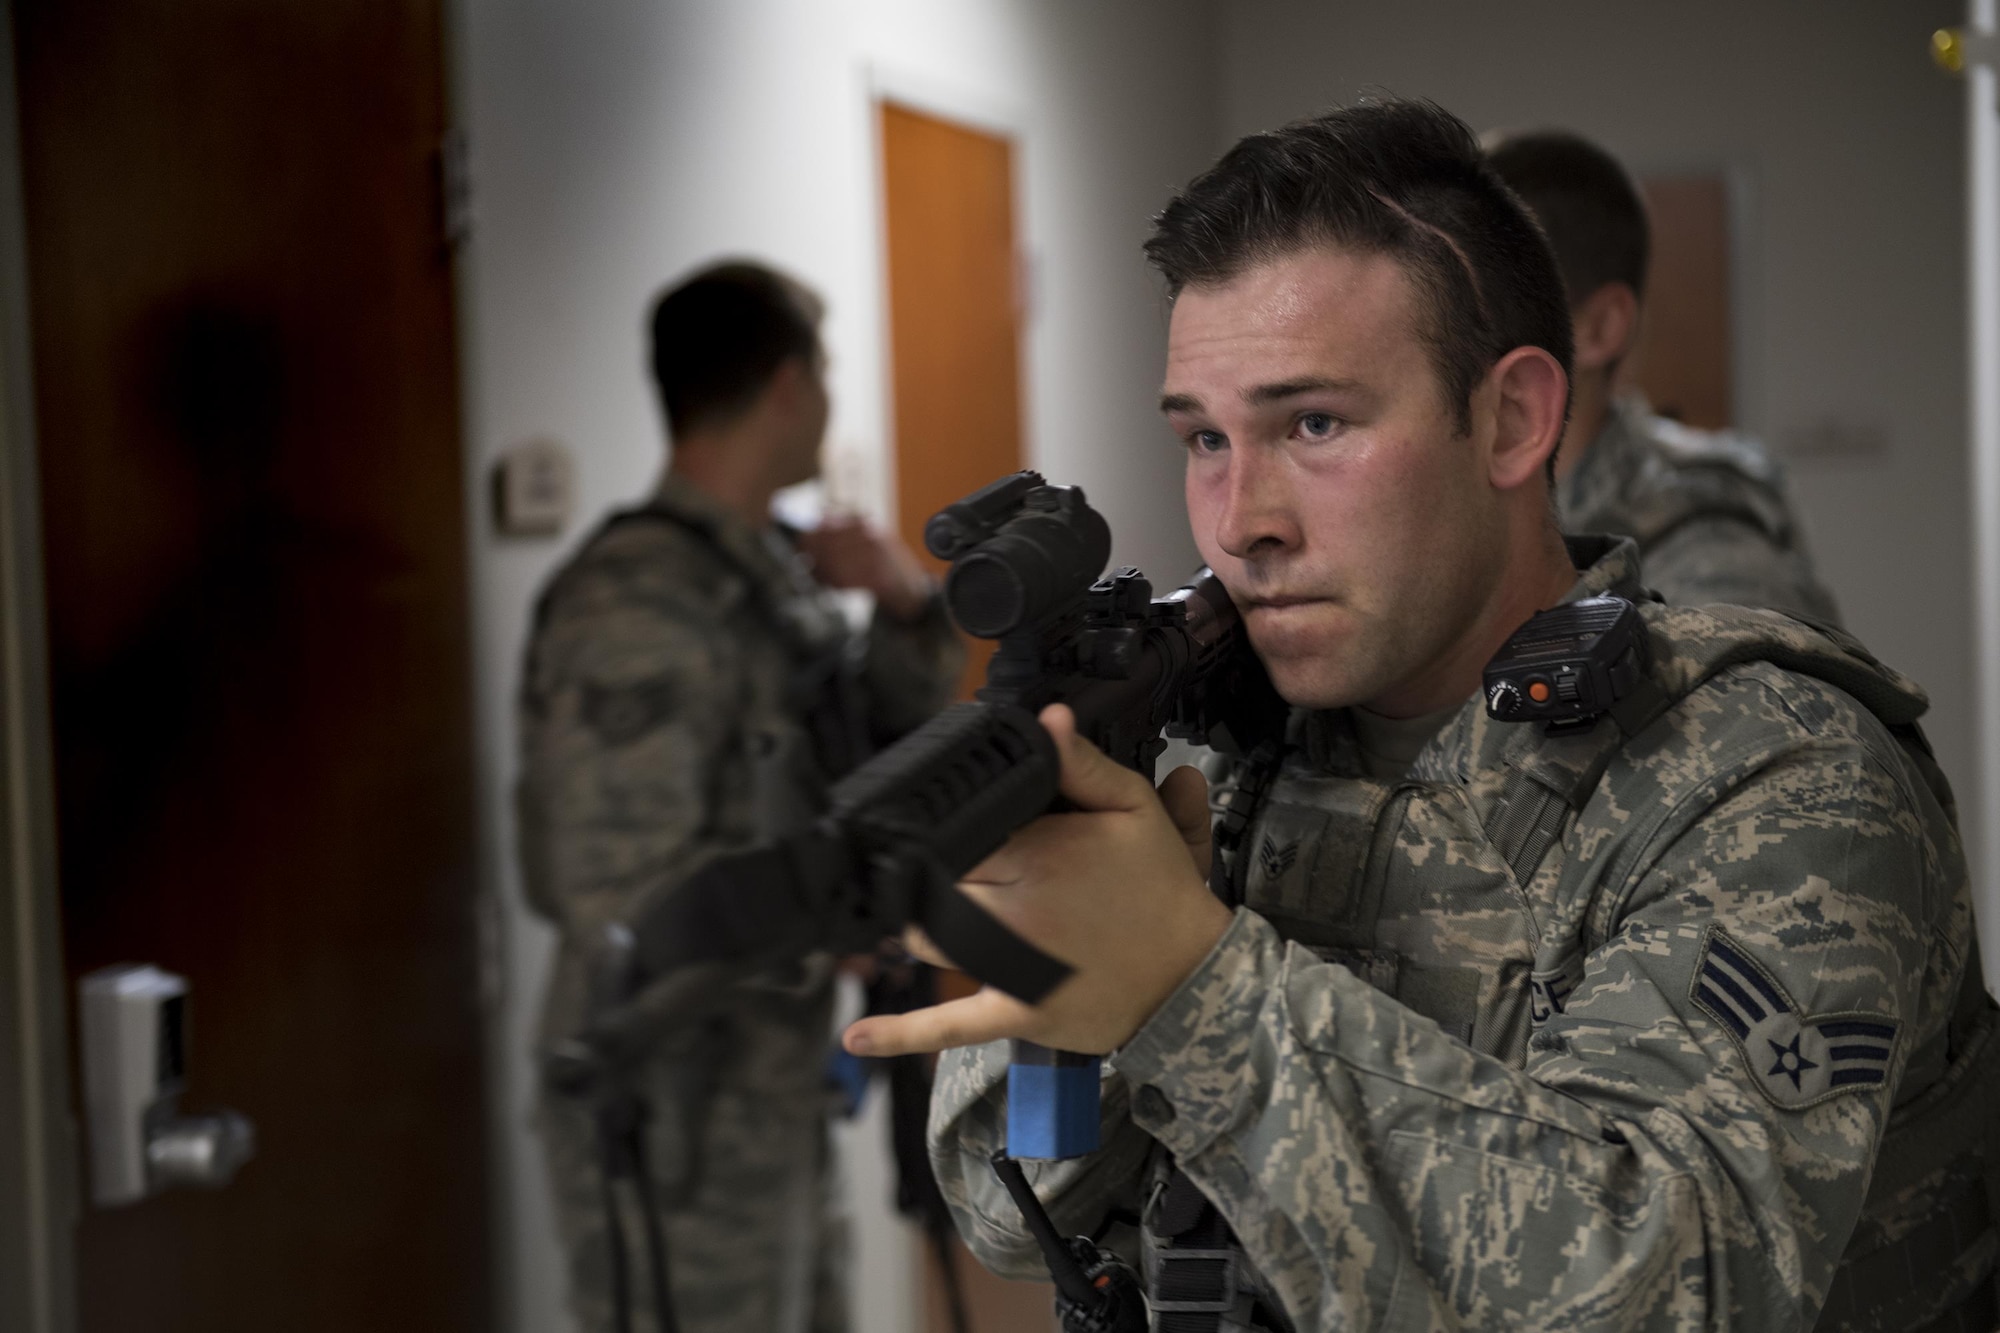 Senior Airman Matthew McFarlin, 23d Security Forces Squadron entry controller, advances down a hallway during an active shooter exercise, Dec. 8, 2016, at Moody Air Force Base, Ga. Members of the 23d SFS systematically moved through the building ensuring no additional threats were present. (U.S. Air Force photo by Airman 1st Class Daniel Snider)